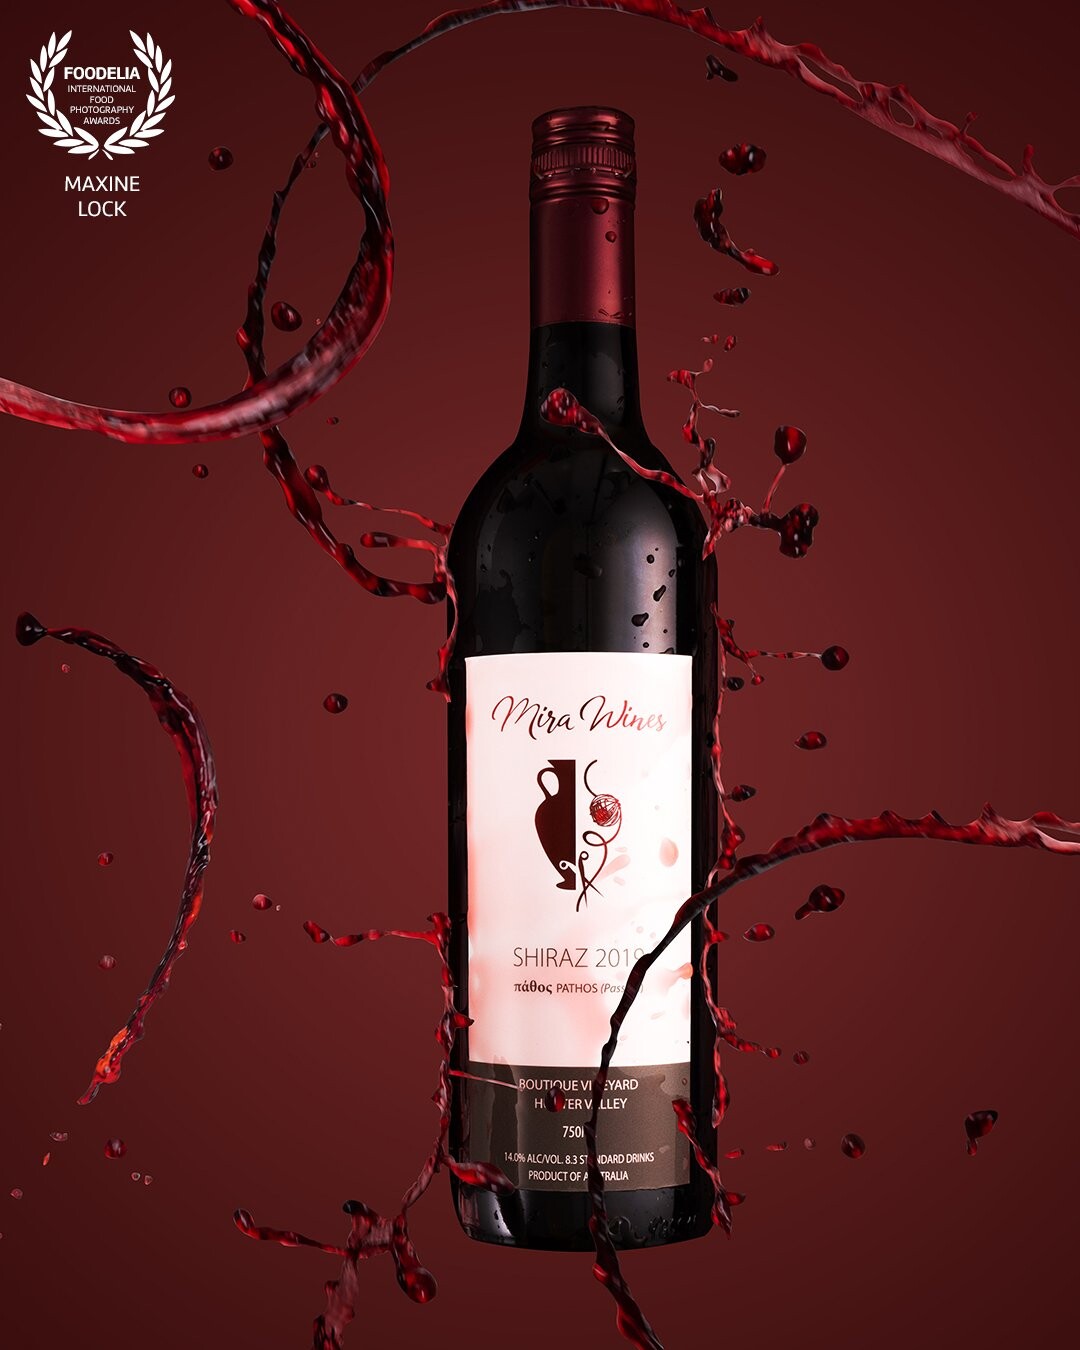 Bottle of red wine, with red wine splashes creating an illusion that the splashes are both hitting against the bottle, as well as being splashes around the bottle itself. All against a red wine colour in the background.